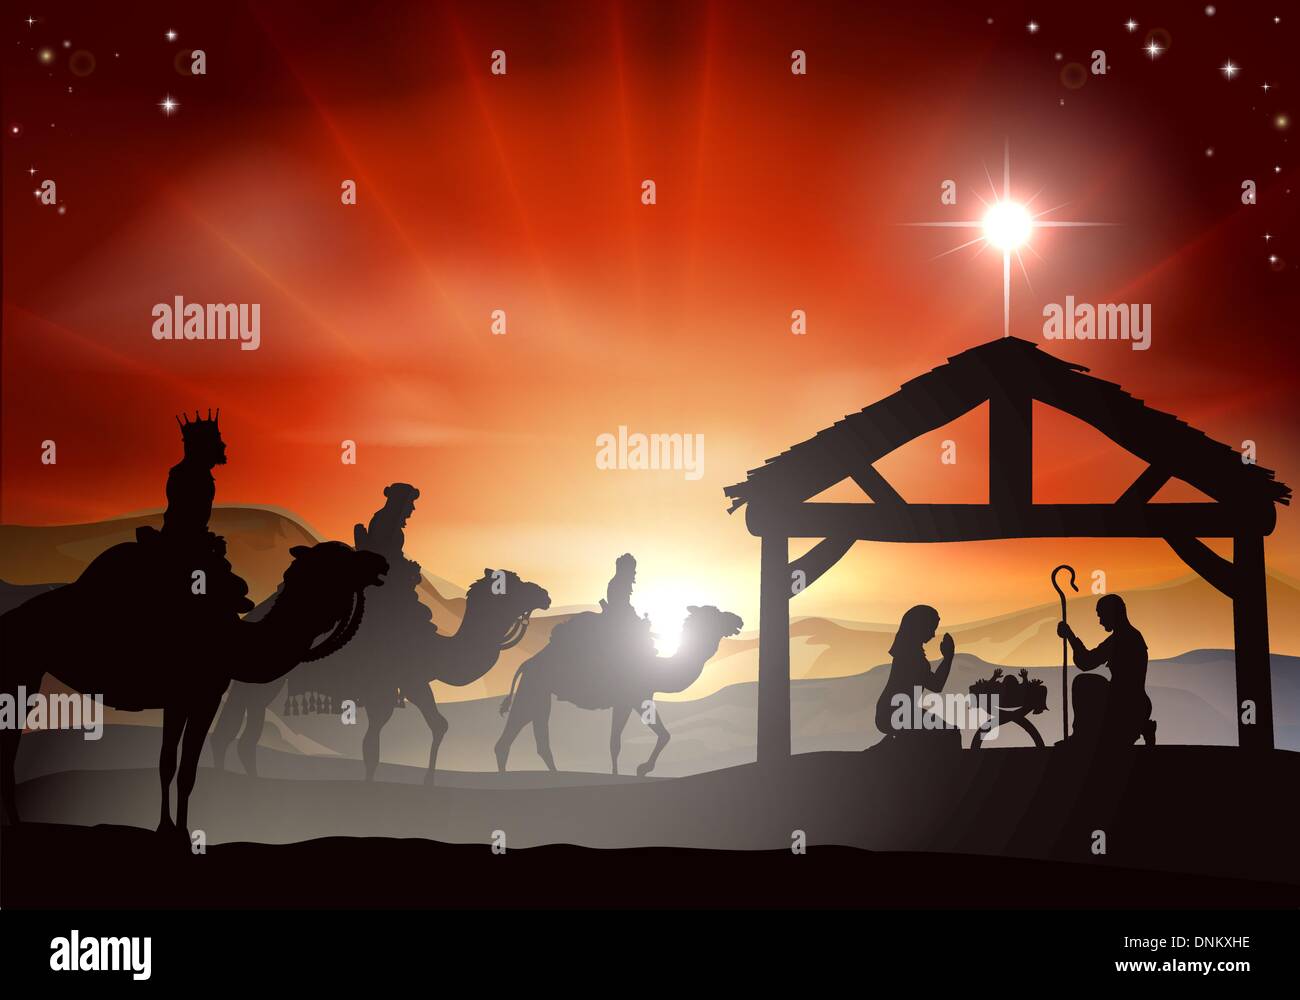 Christmas nativity scene with baby Jesus in the manger in silhouette, three wise men or kings and star of Bethlehem Stock Vector